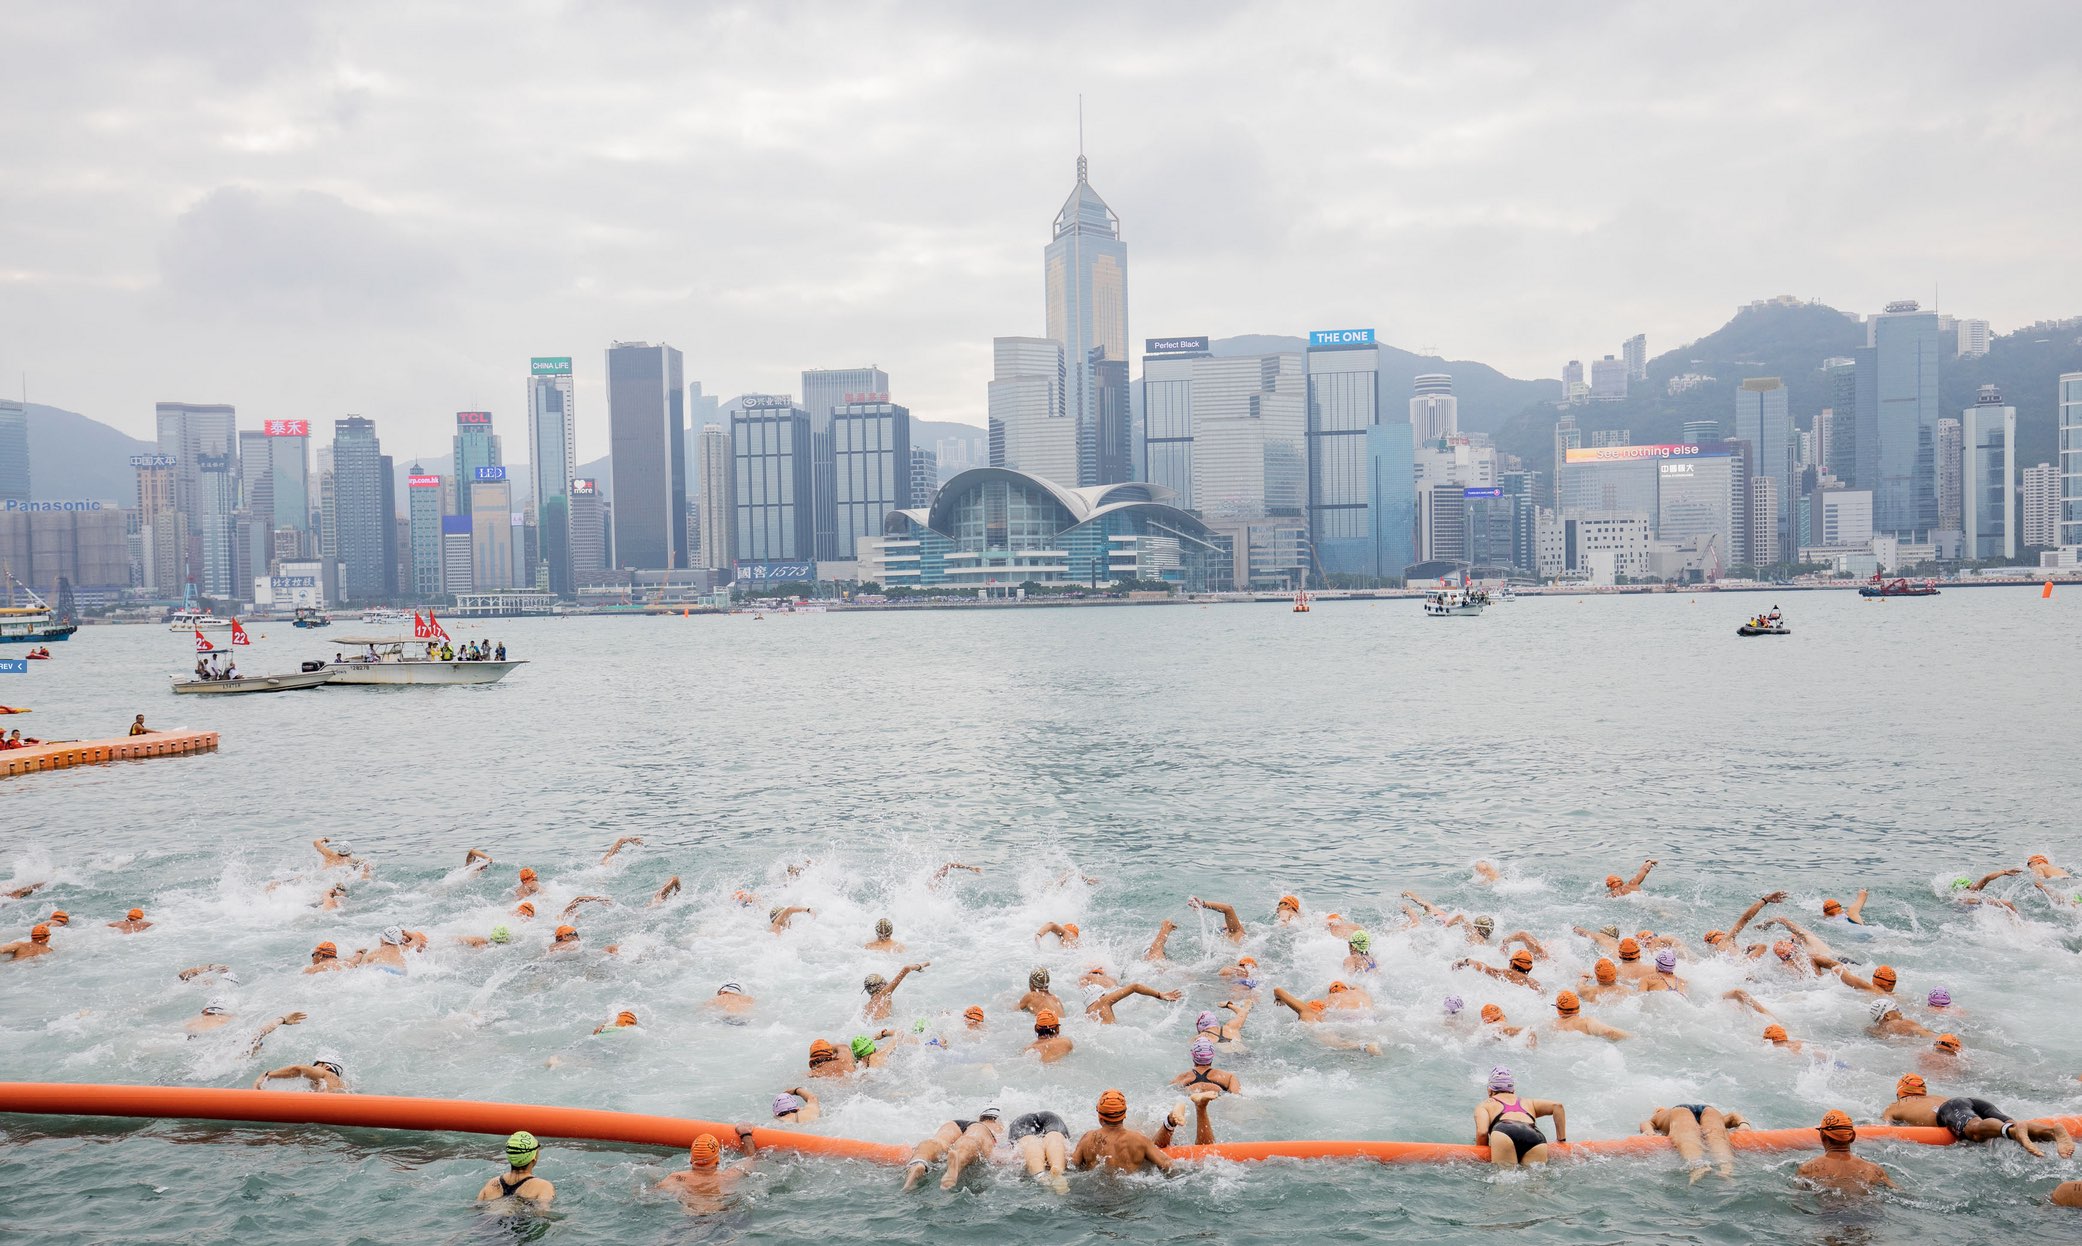 Participants take part in the 2018 New World Harbour Race in Hong Kong. Photo via New World Harbour Race.